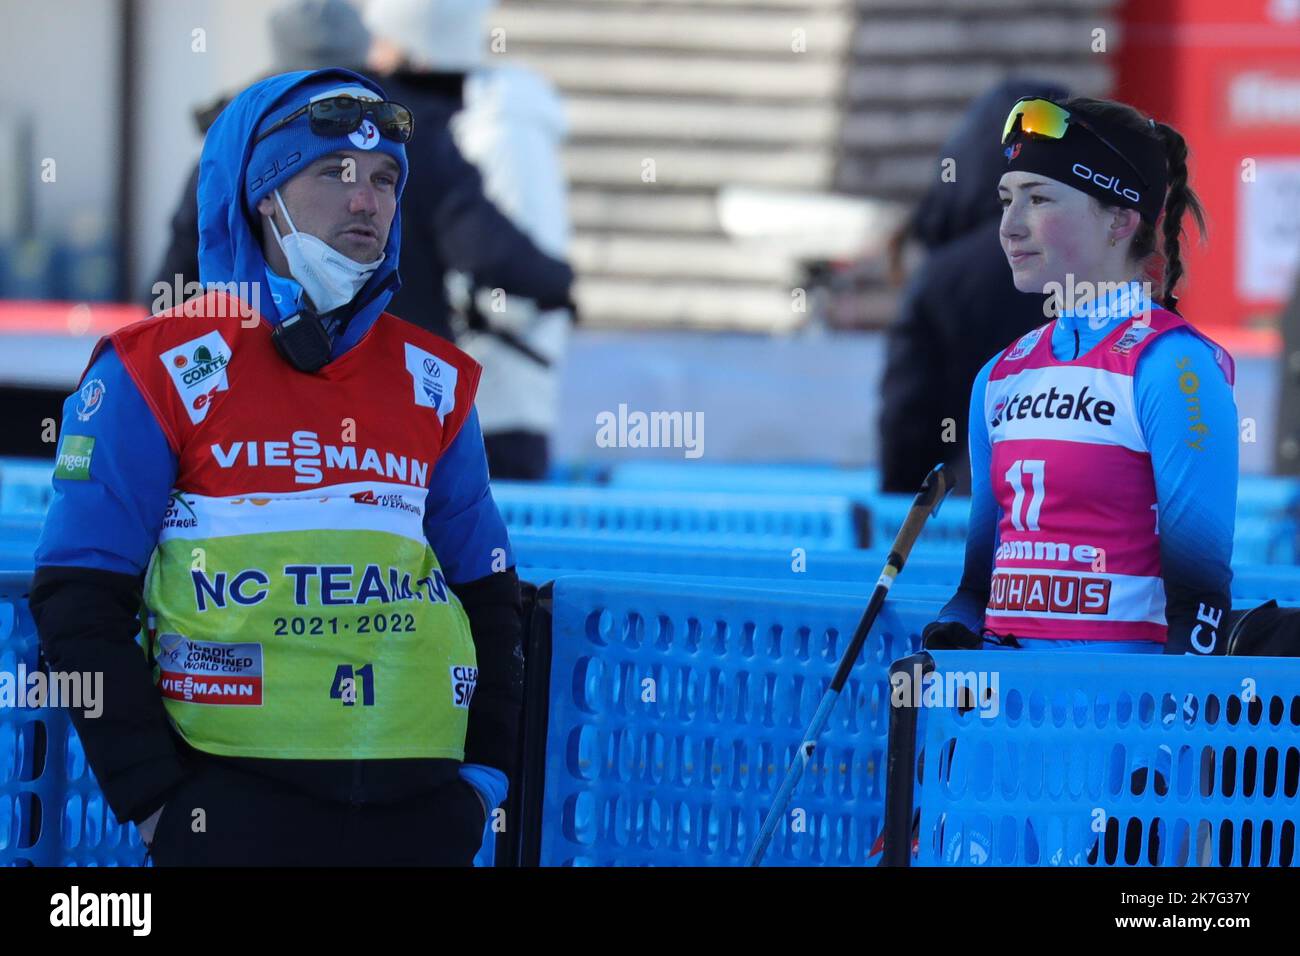 ©Pierre Teyssot/MAXPPP ; FIS Nordic Combined World Cup 2022 under Covid-19 Pandemic. Lago di Tesero, Val Di Fiemme, Italy on January 8, 2022. Lena Brocard (FRA) and her coach. Â© Pierre Teyssot / Maxppp  Stock Photo